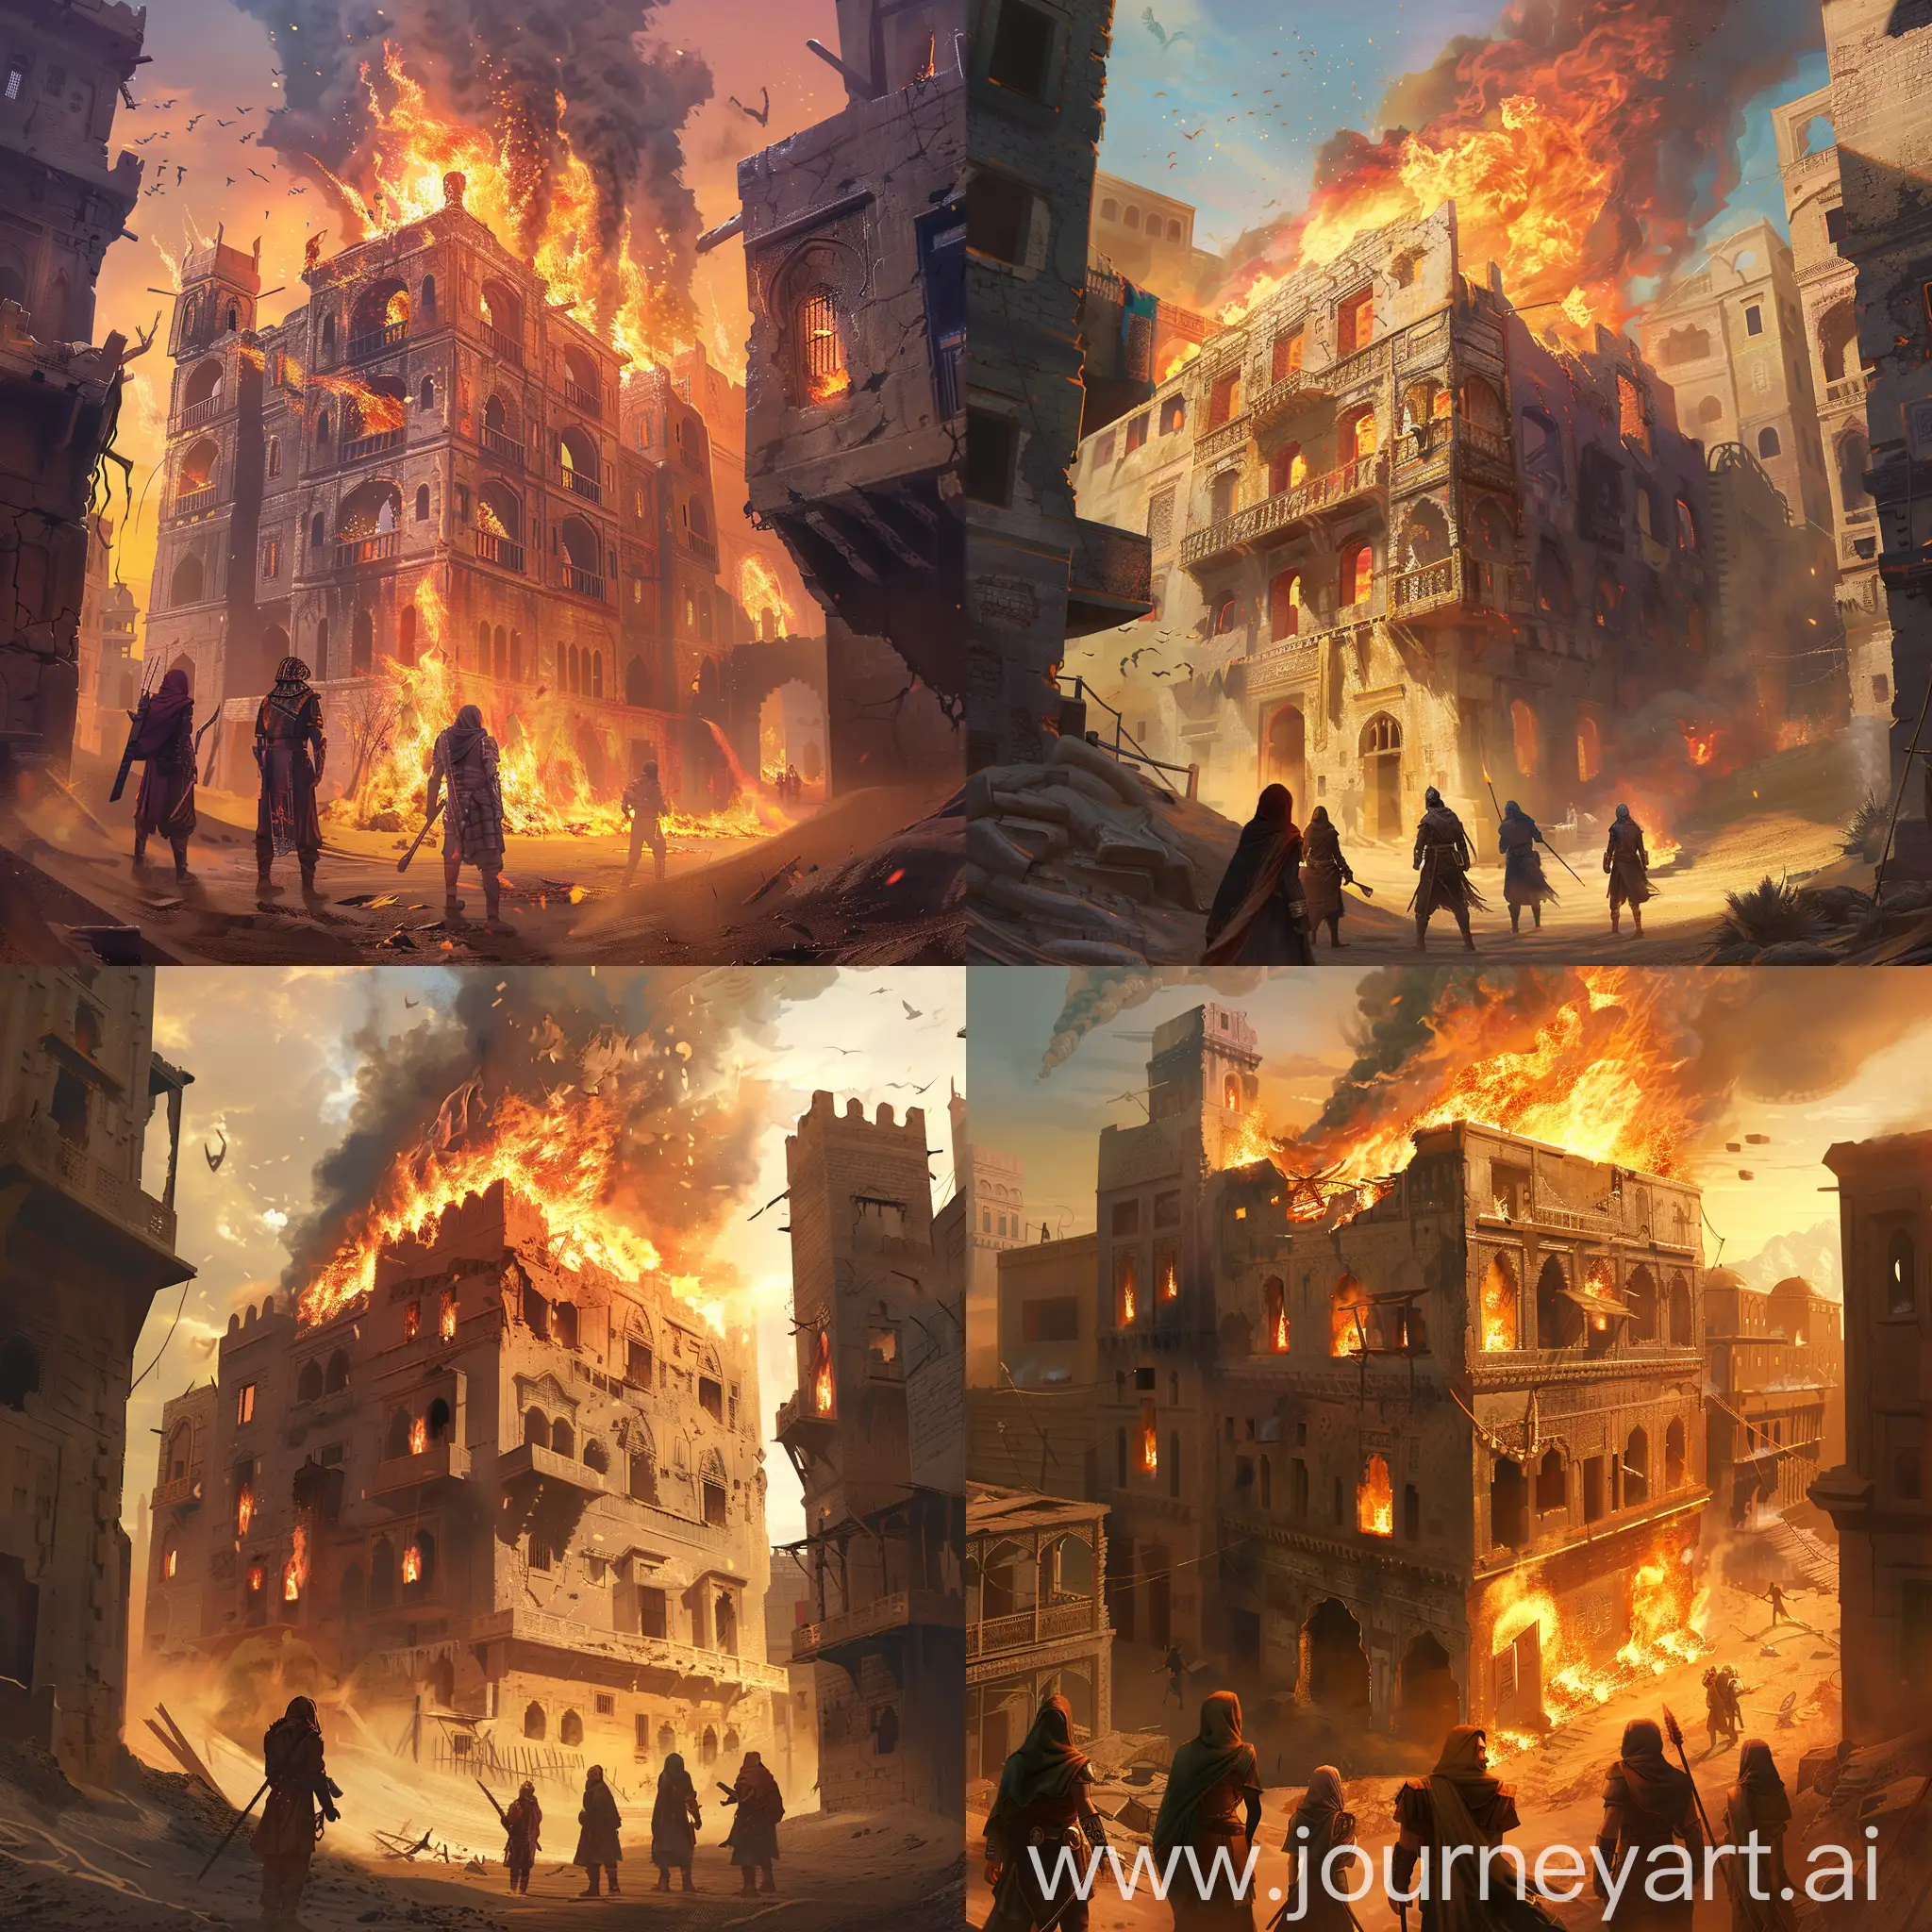 A burning building in desert slums next to other buildings with five adventurers watching it fantasy style